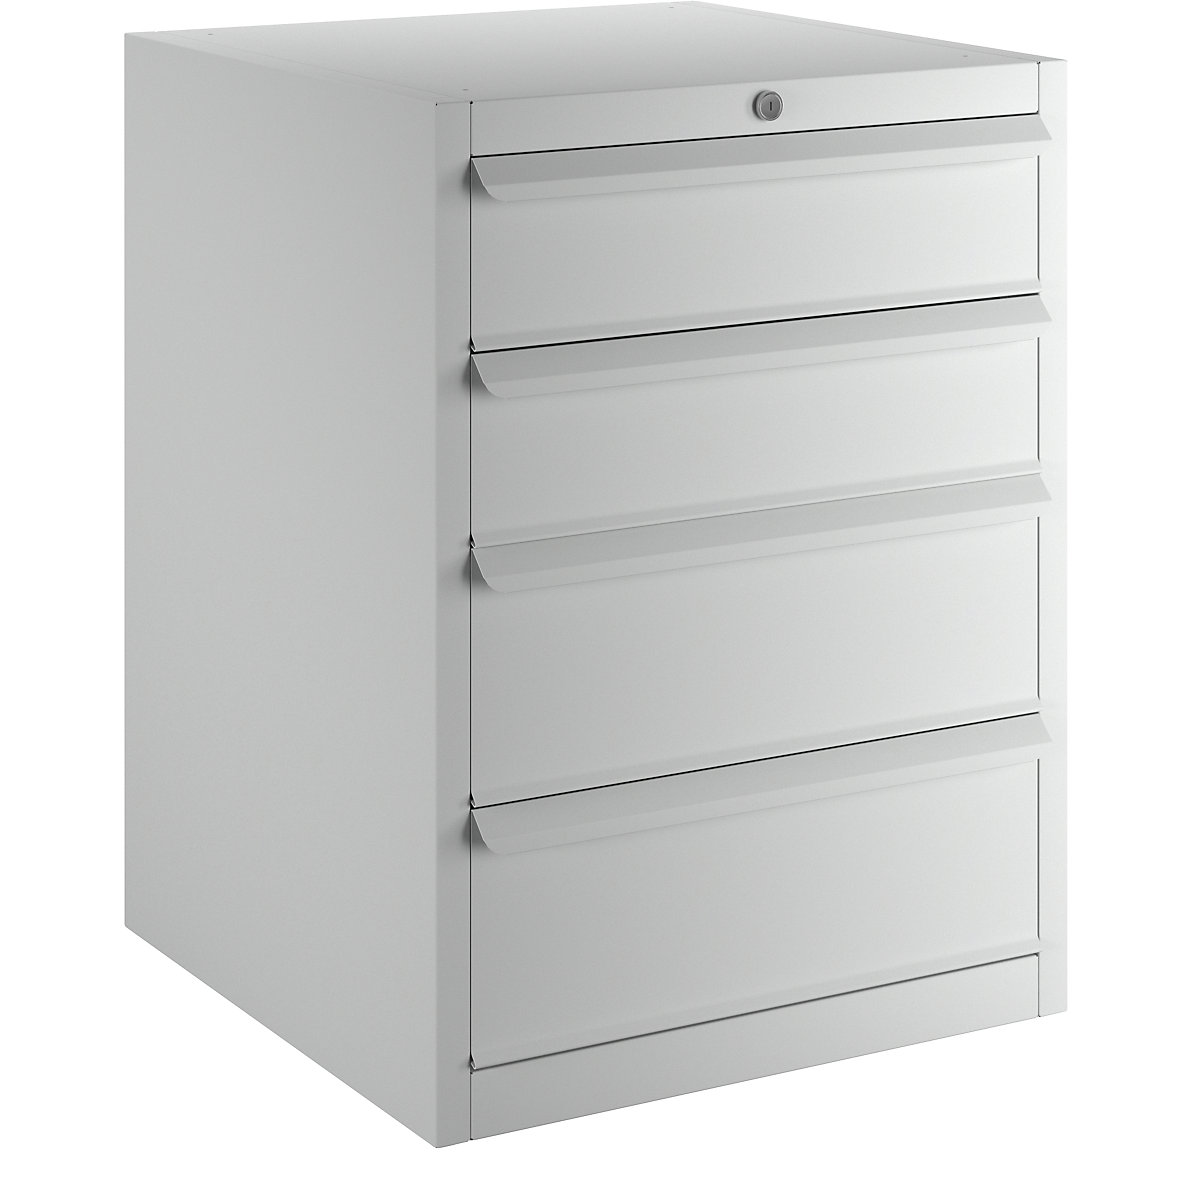 Drawer cupboard, WxD 600 x 600 mm, height 800 mm, 4 drawers, light grey-2